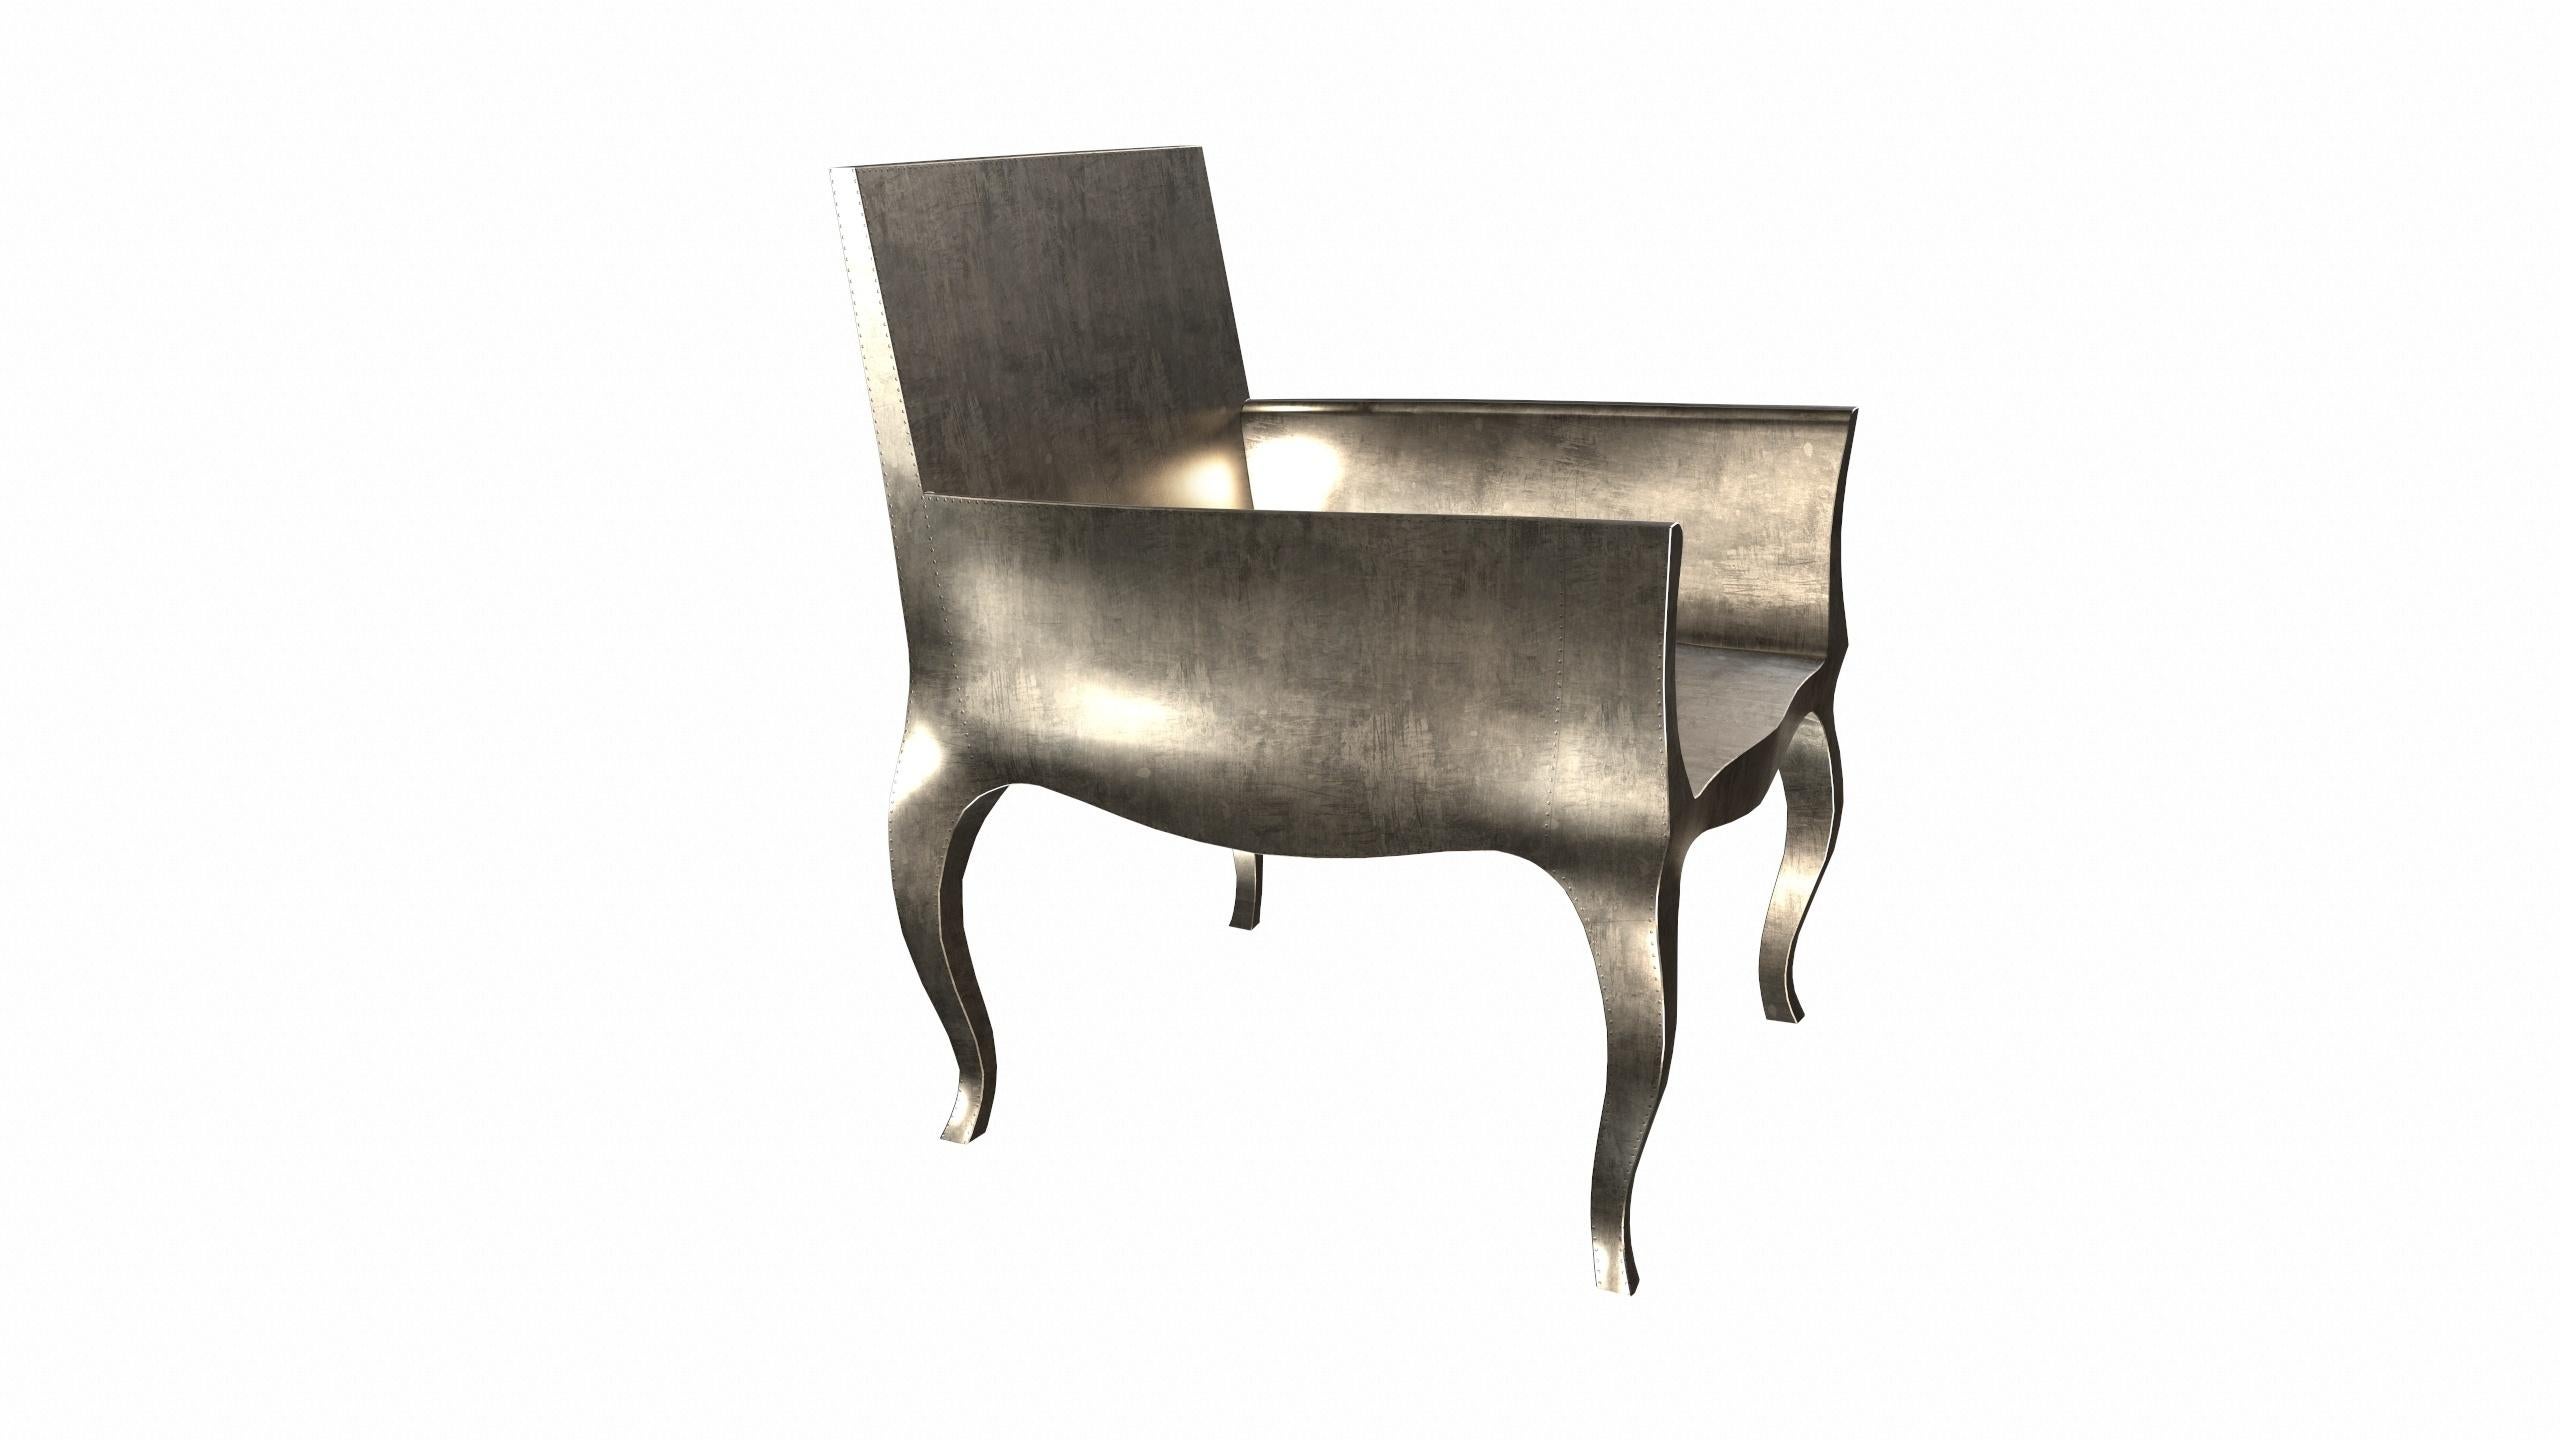 Art Deco Desk Chair in Smooth Antique Bronze by Paul Mathieu for S. Odegard For Sale 1